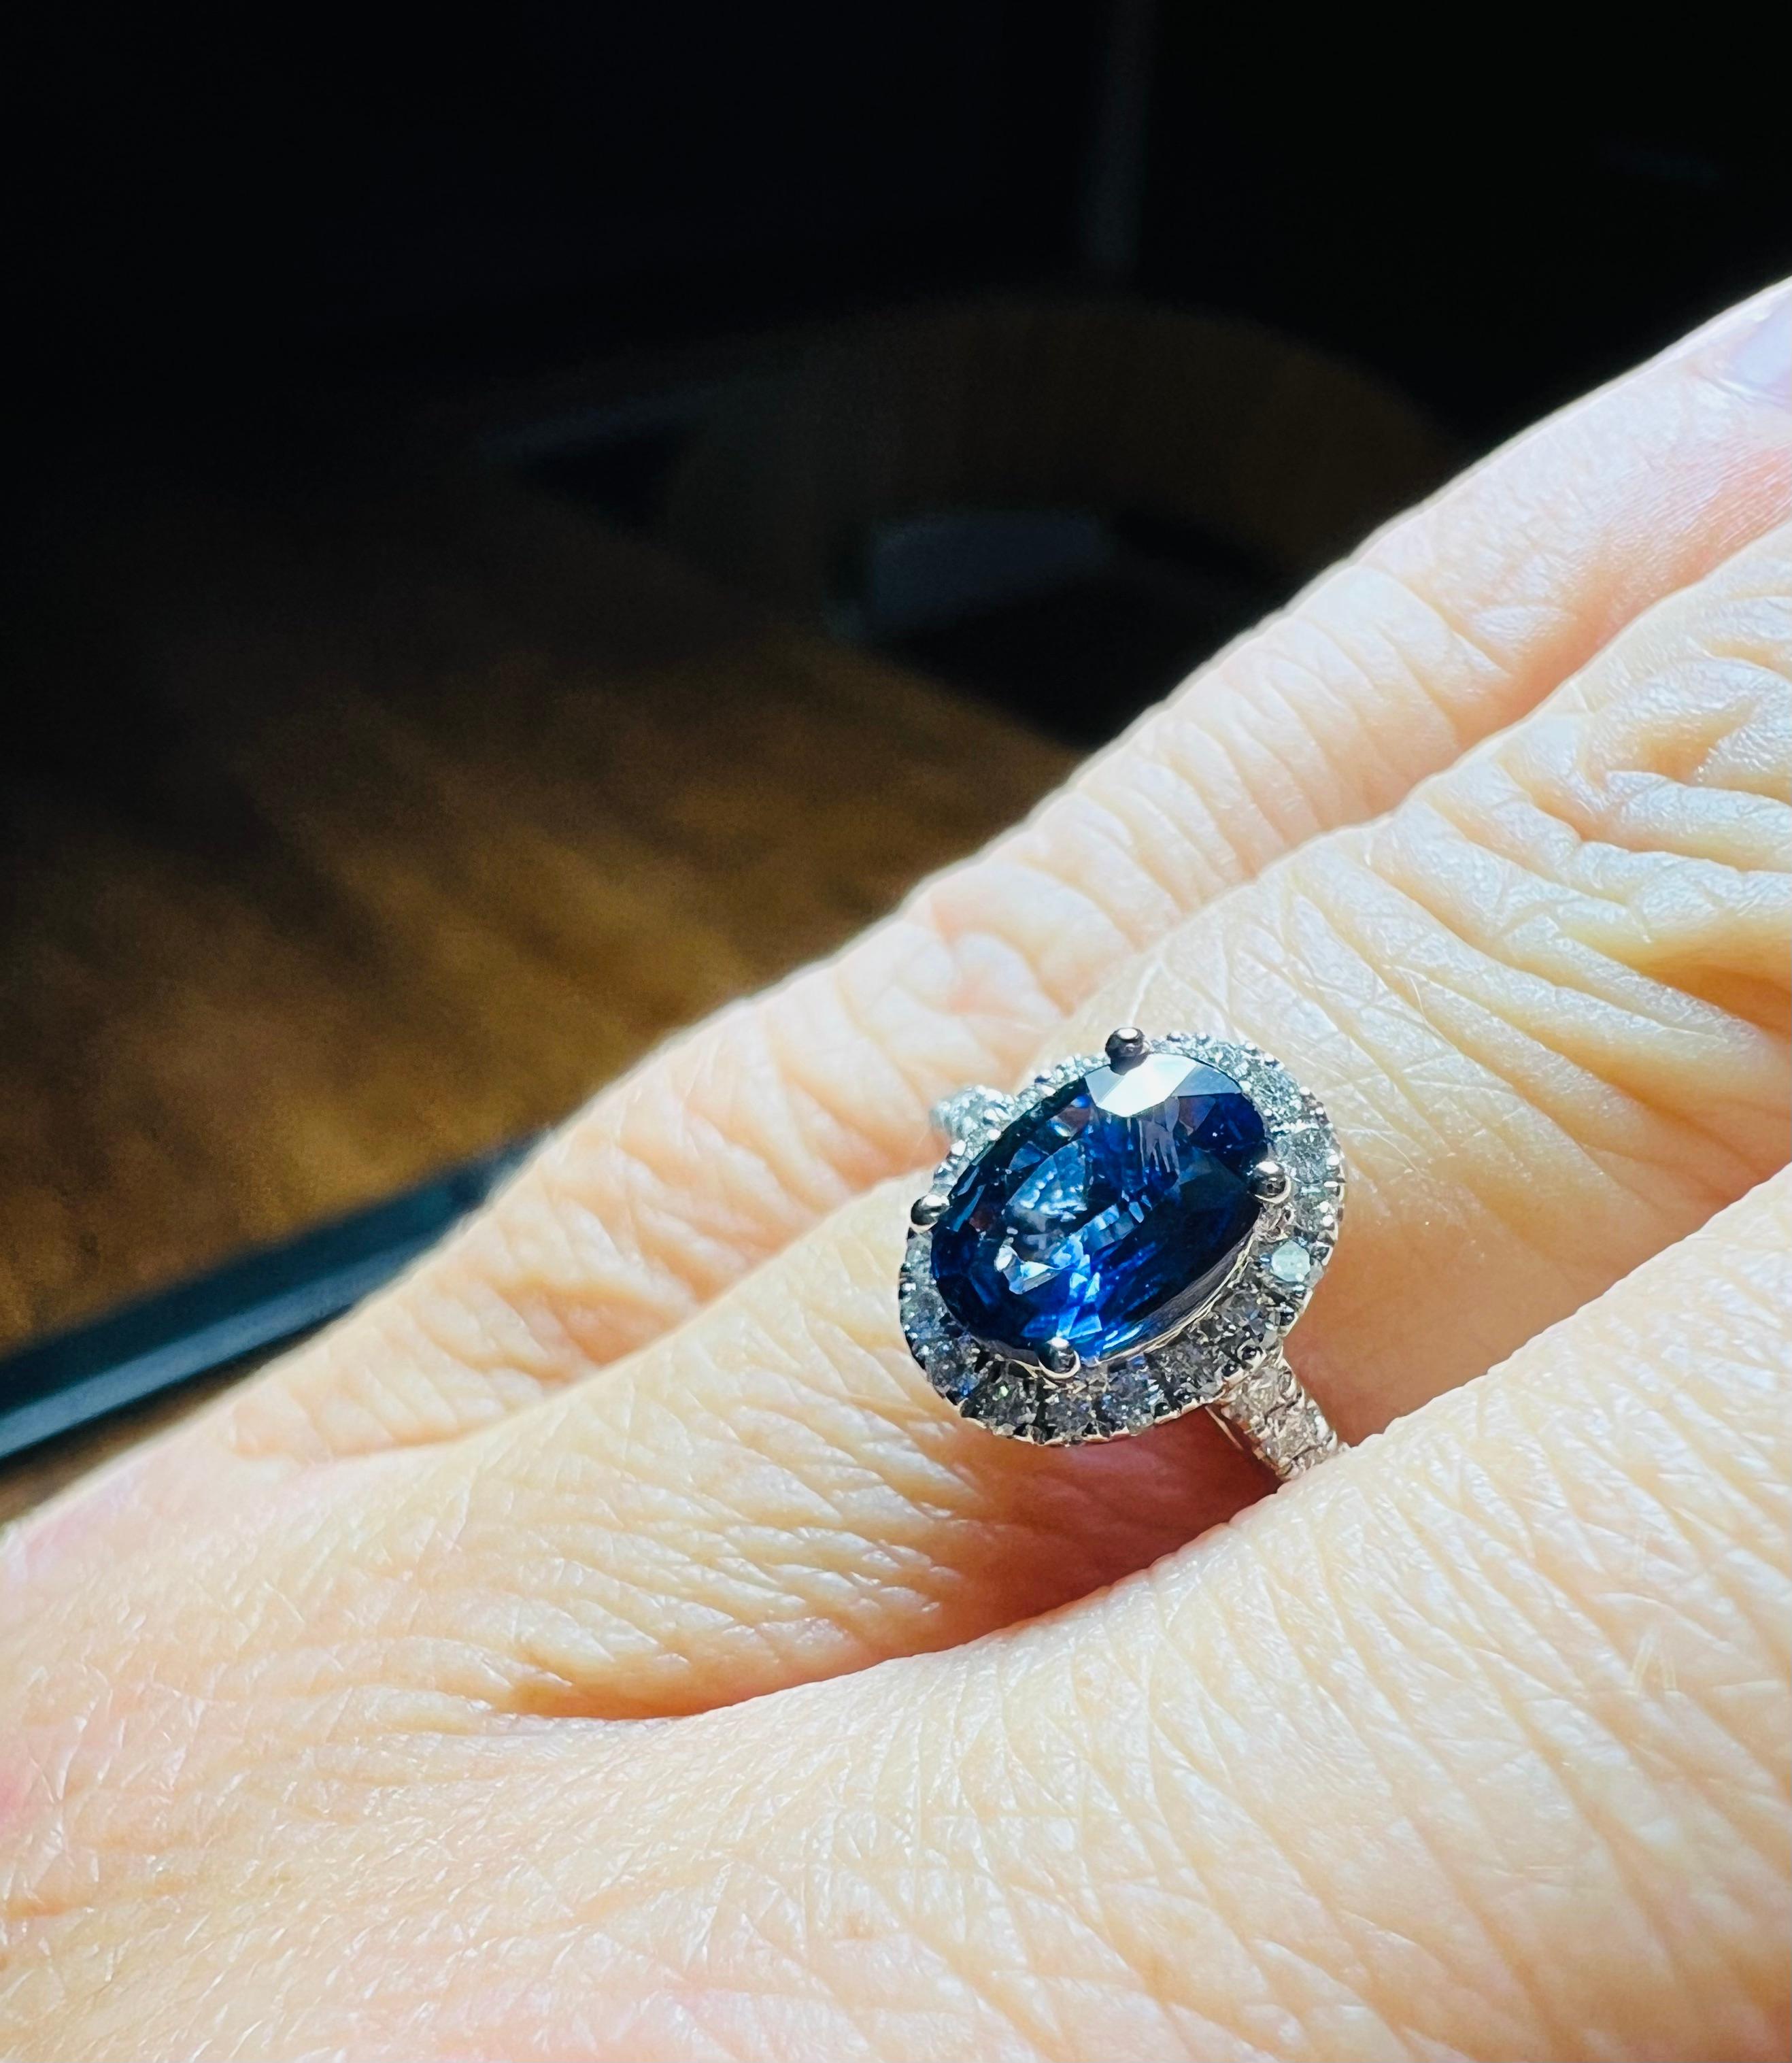 Ring Set With A Sapphire Surrounded By Diamonds, 18 Carat Gold 5